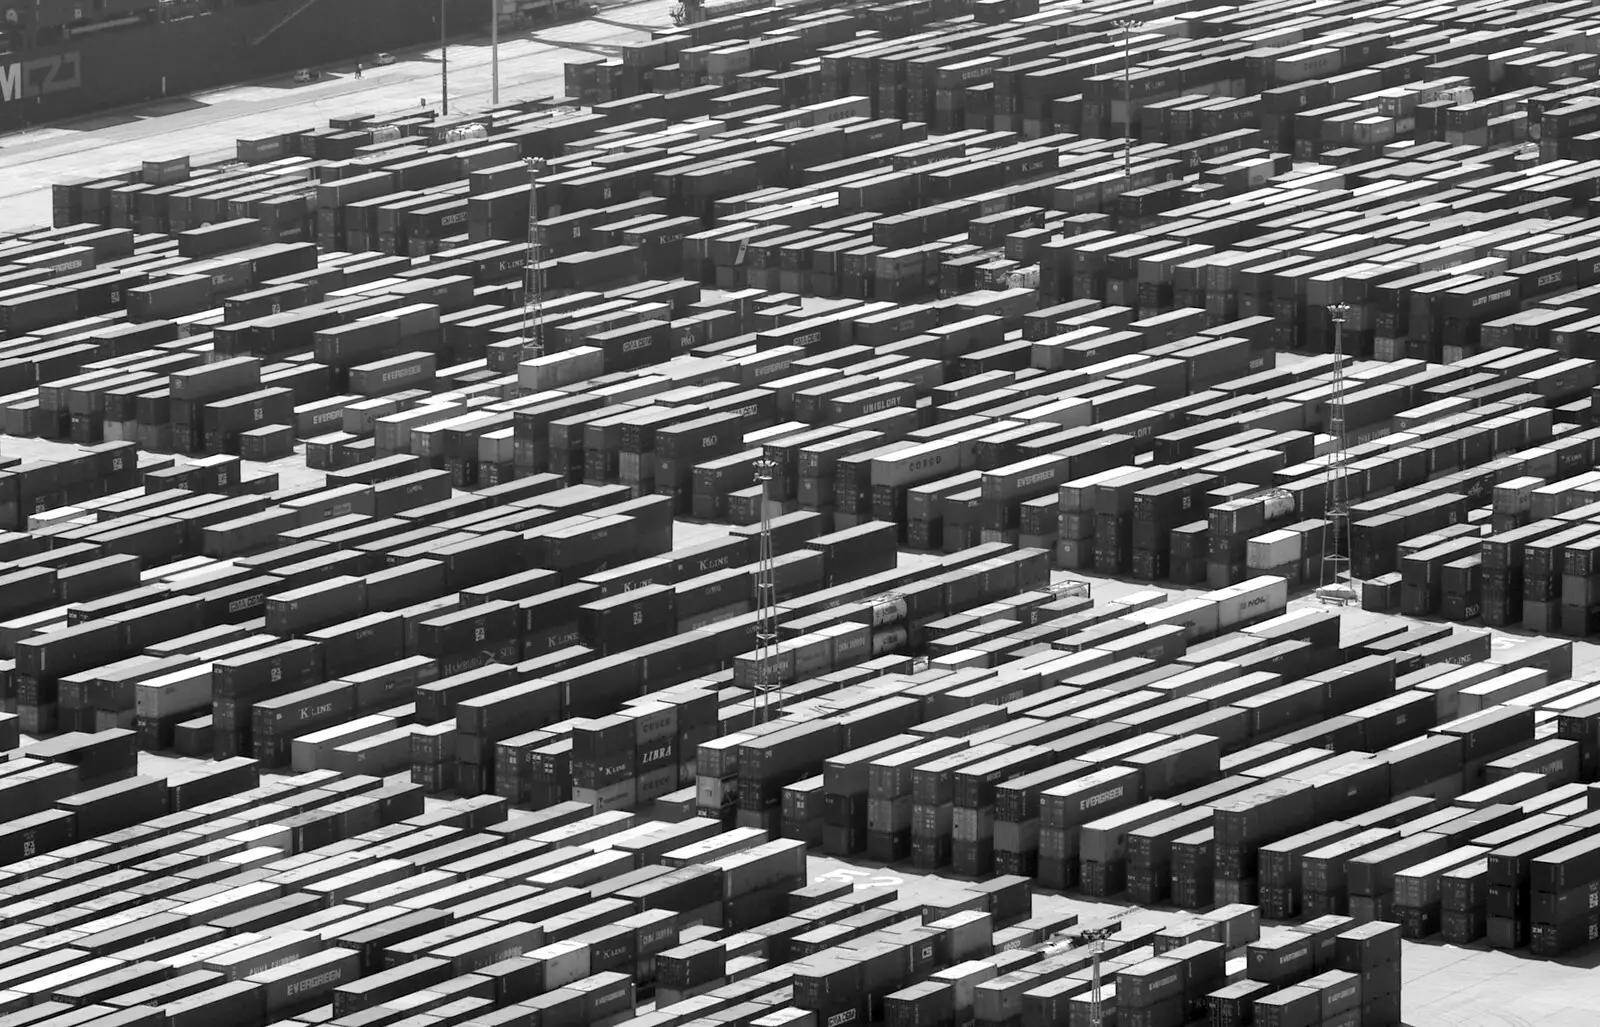 Thousands of containers lined up on the dockside, from Montjuïc and Sant Feliu de Guíxols, Barcelona, Catalunya - 30th April 2005